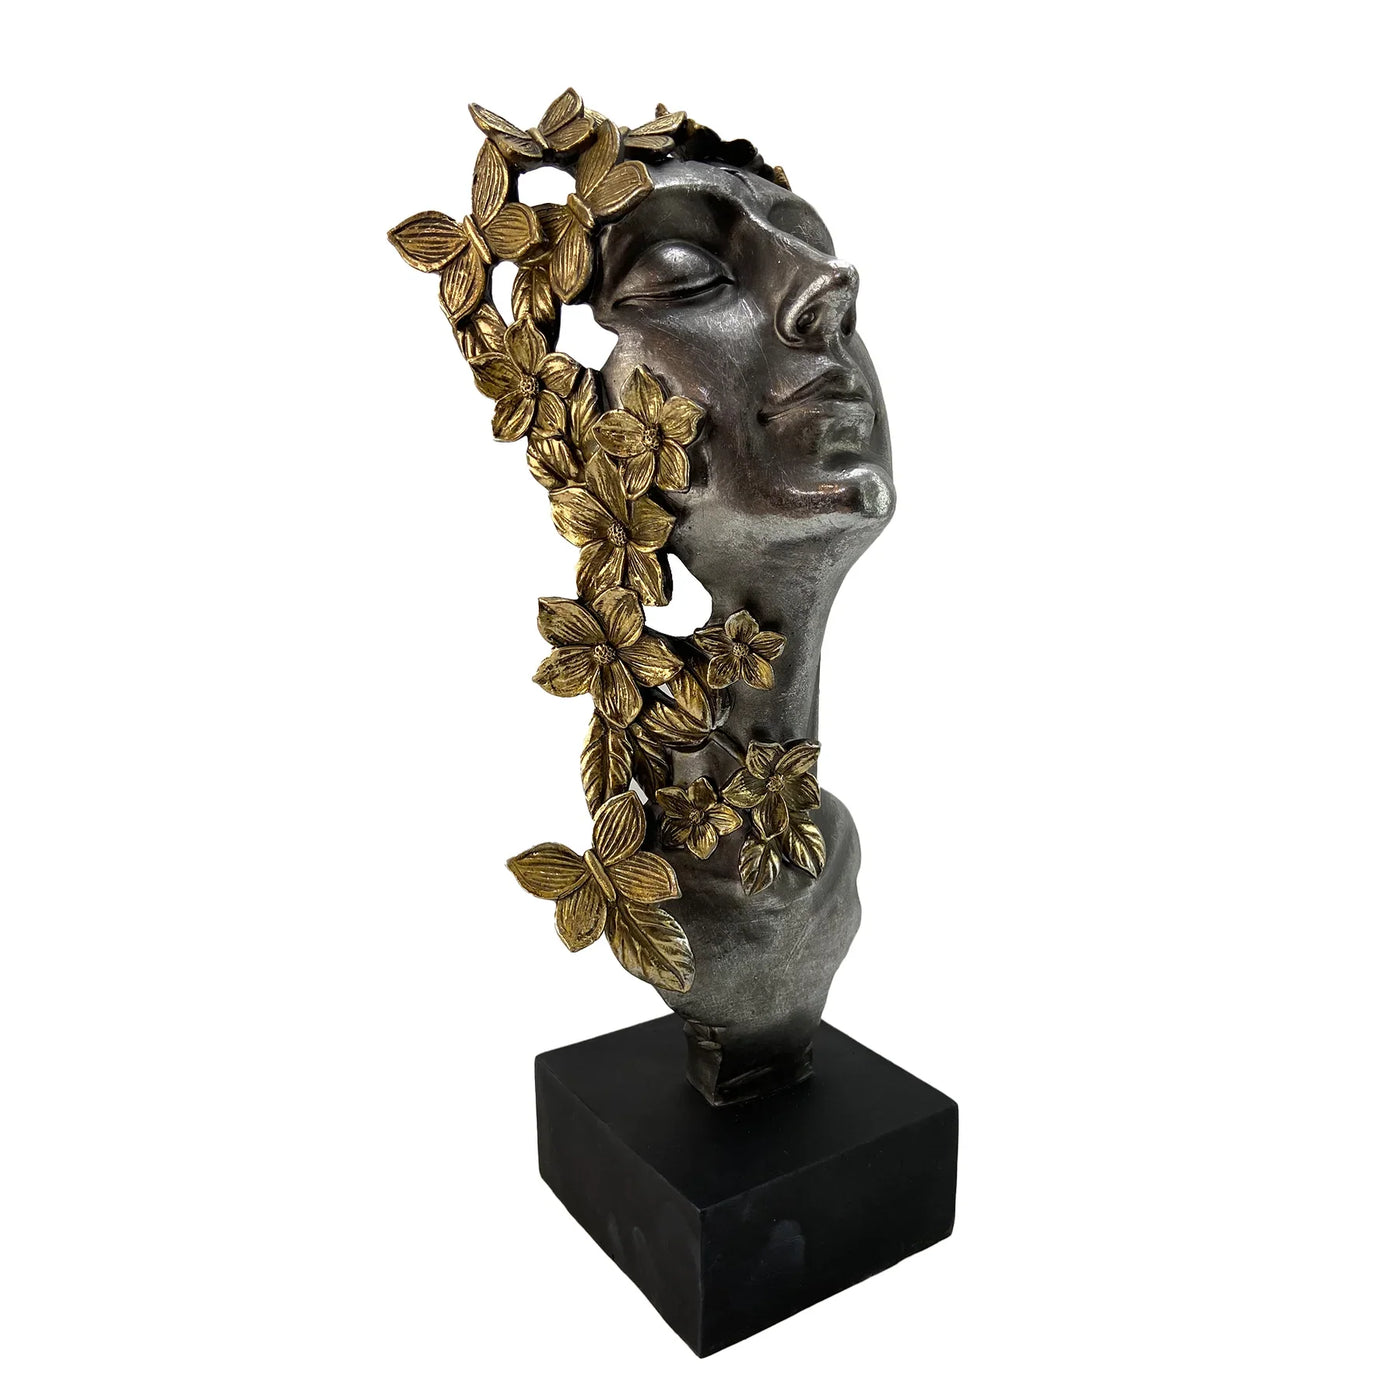 Face Mask Sculpture on Stand 6"x2"x13"